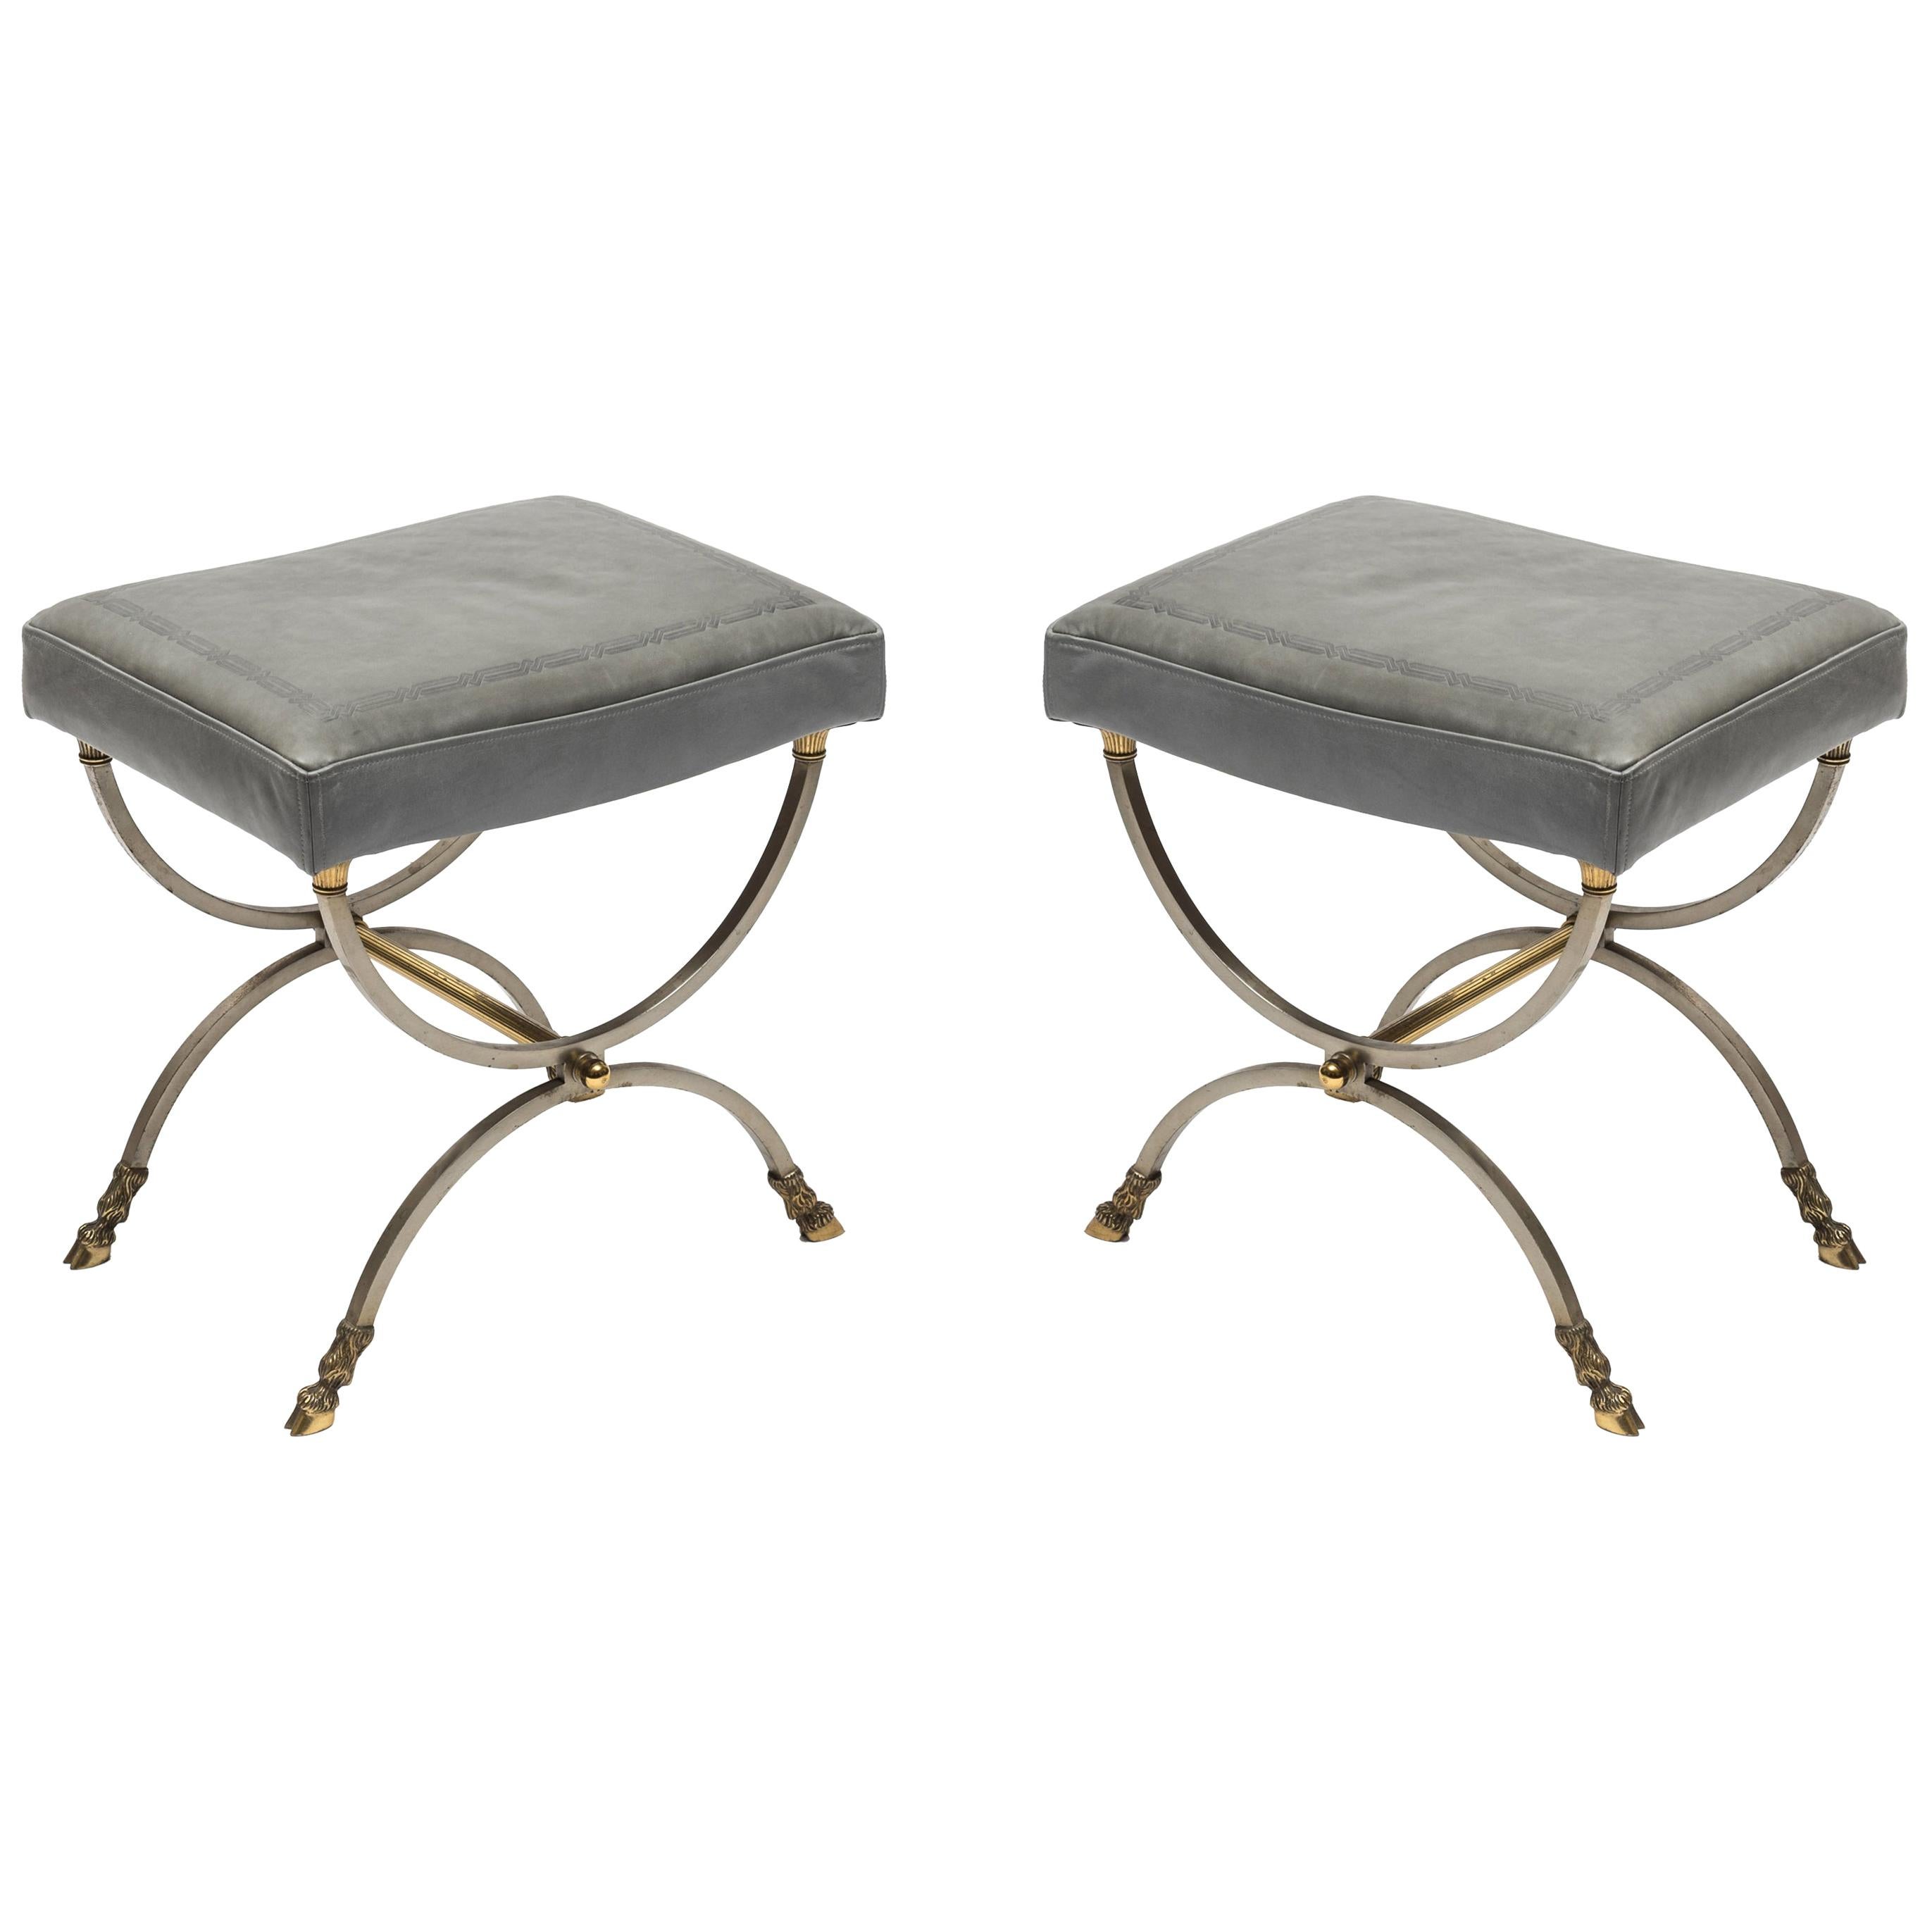 Pair of Neoclassic Ottomans by Maison Charles